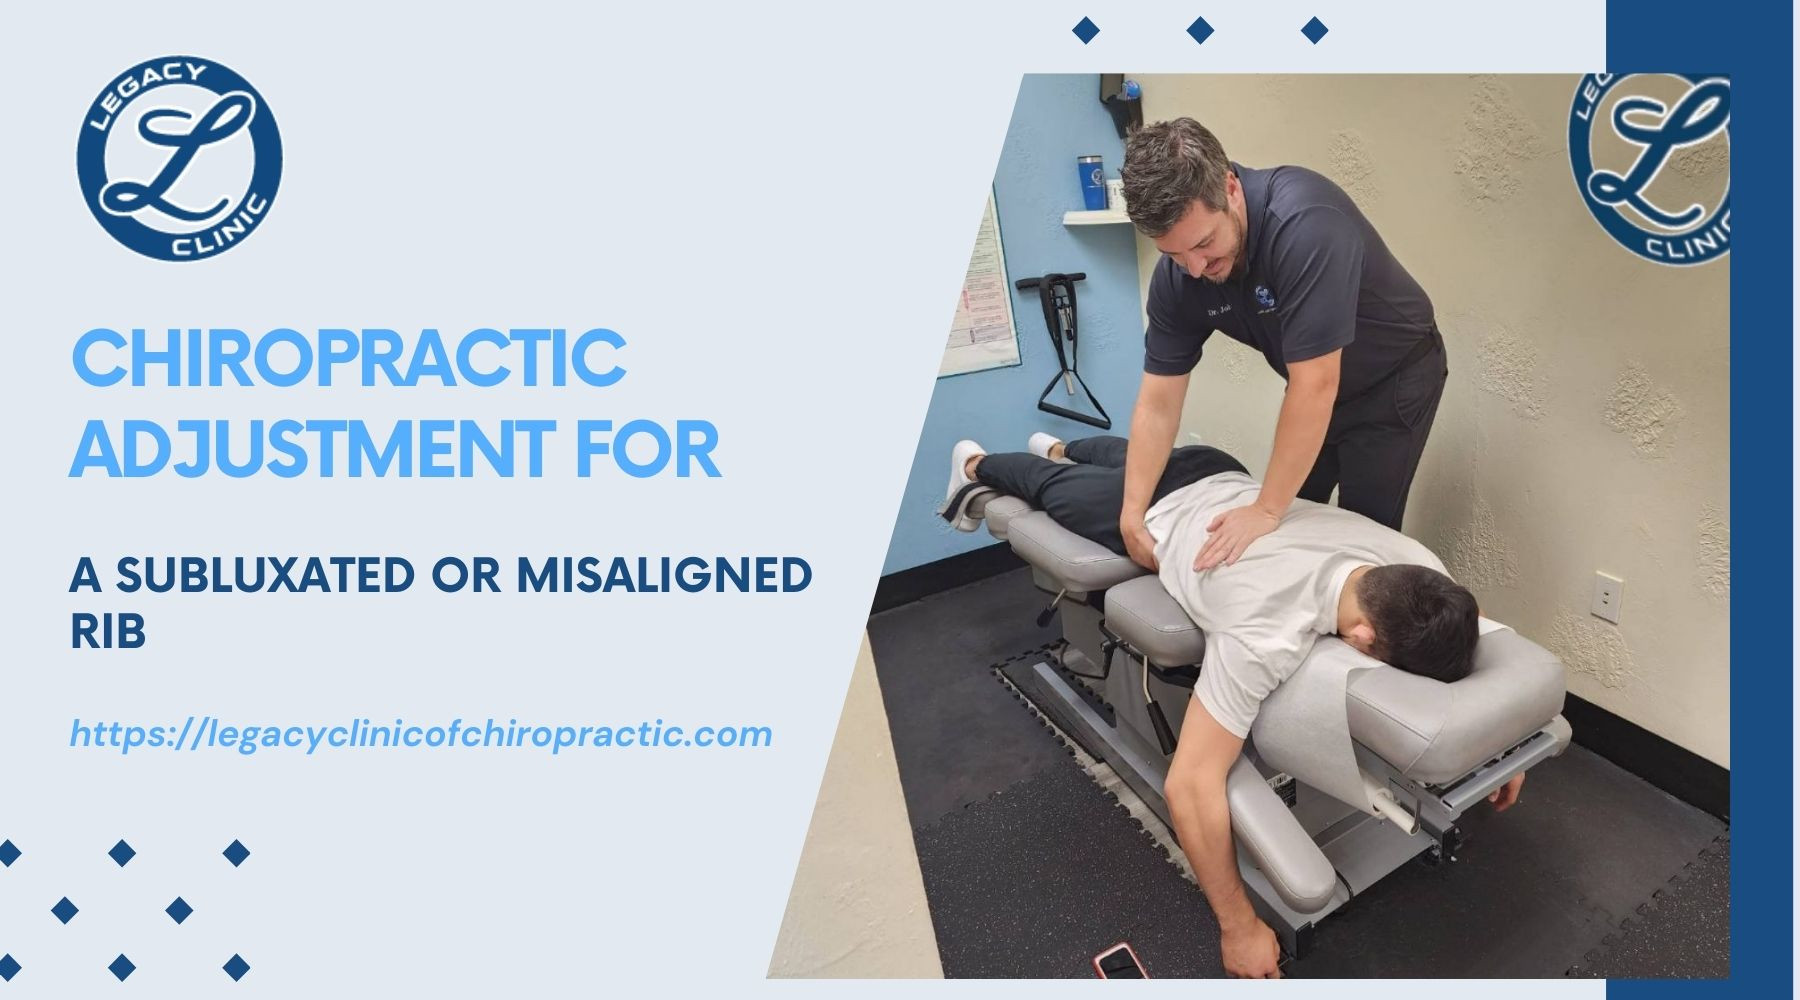 Chiropractic Adjustment for A Subluxated Or Misaligned Rib